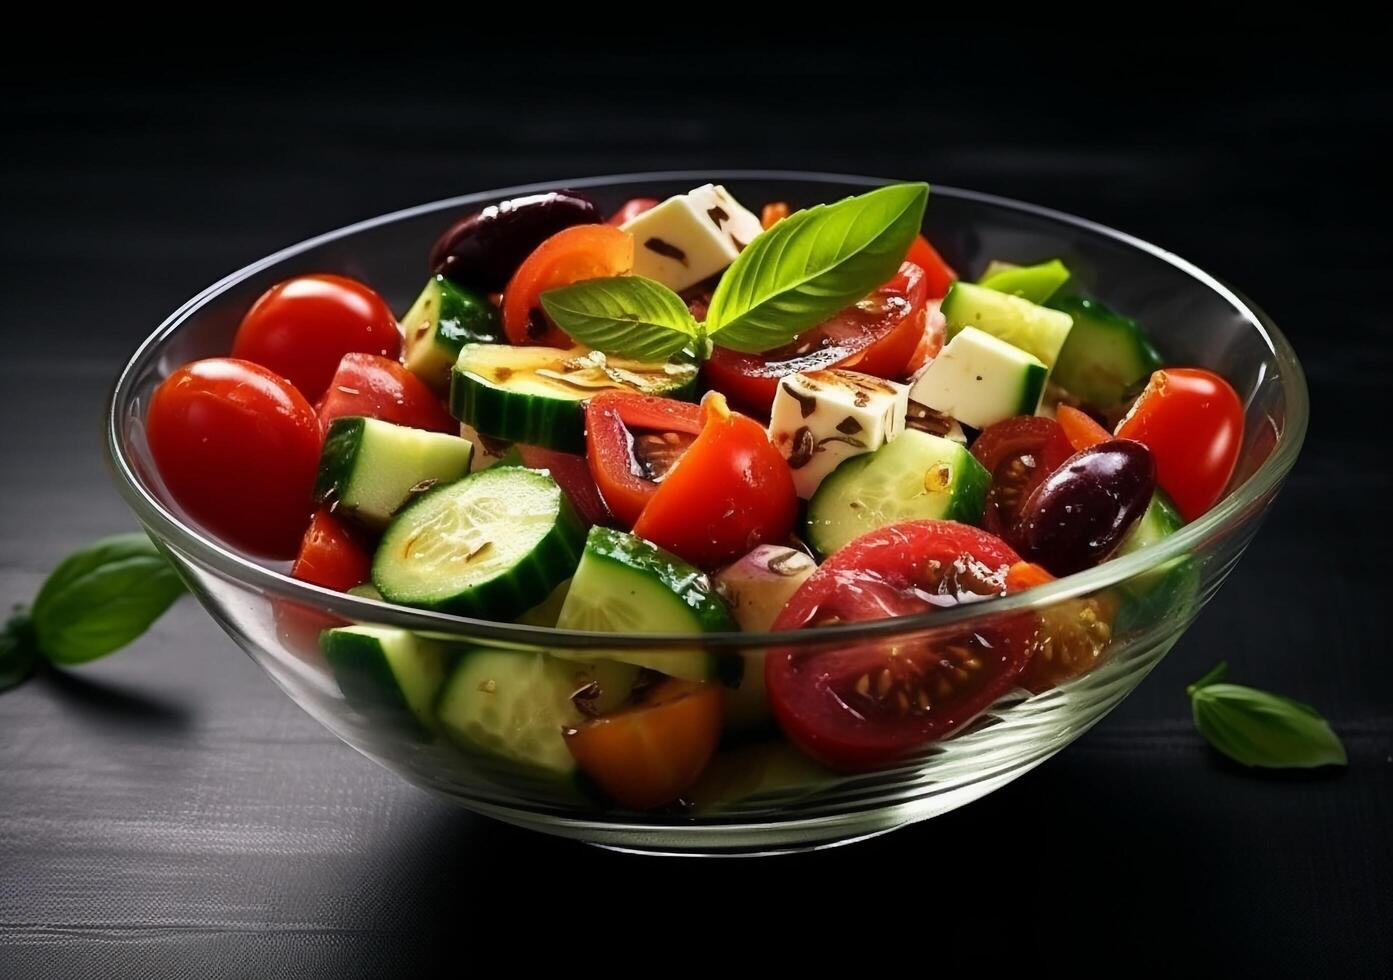 A glass bowl of salad with . photo